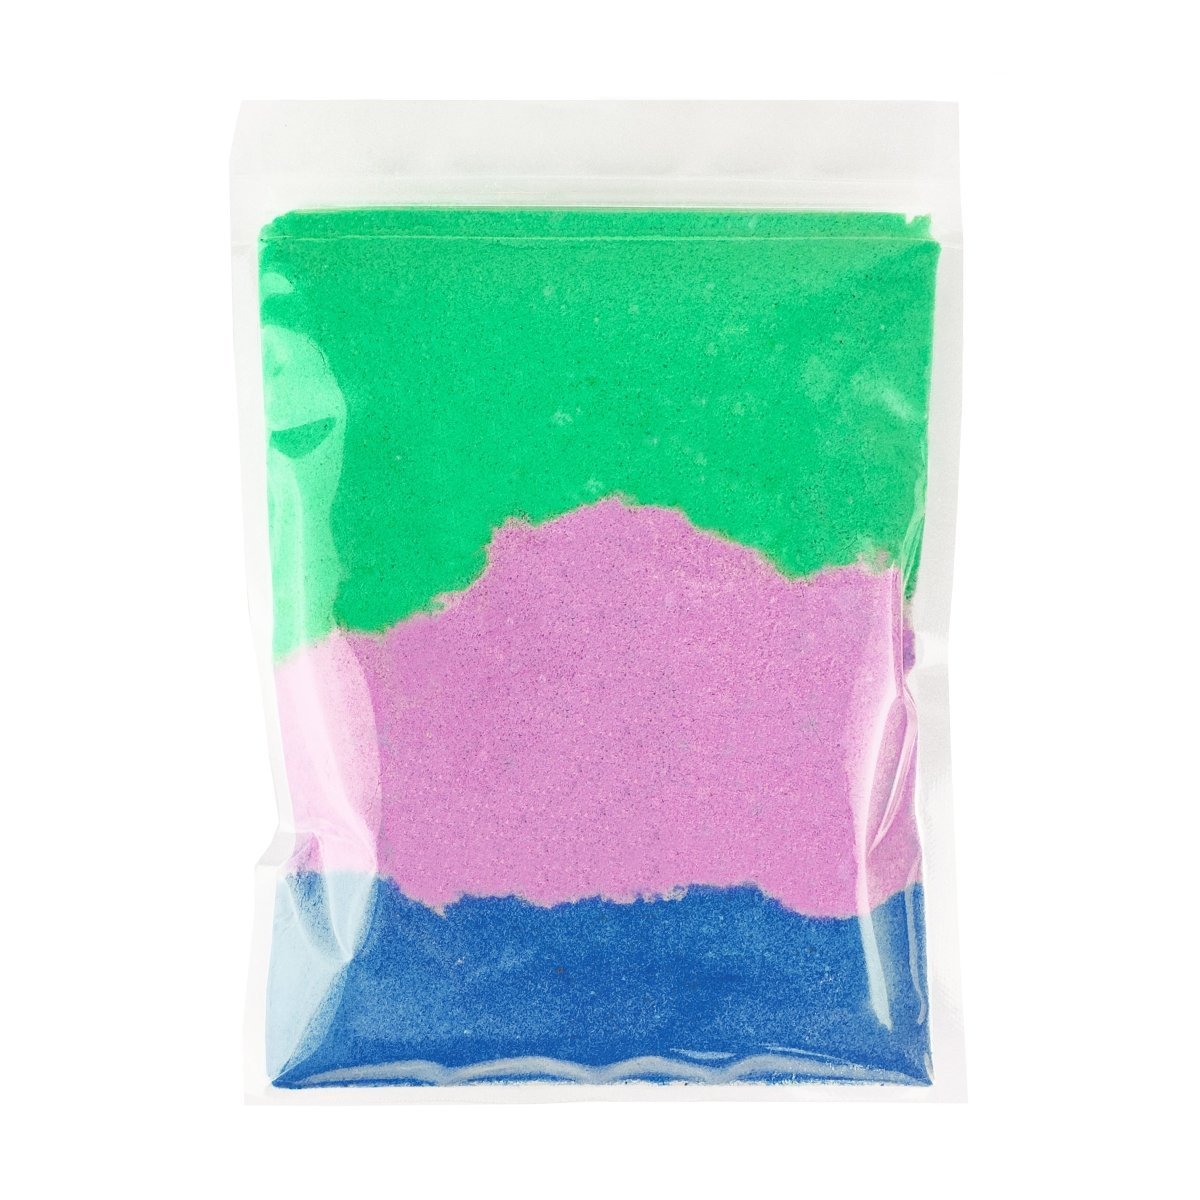 Northern Lights Bath Dust for Kids & Adults - Colourful Glitters & Mint Chocolate Fragrance - Made in Australia by Bath Box